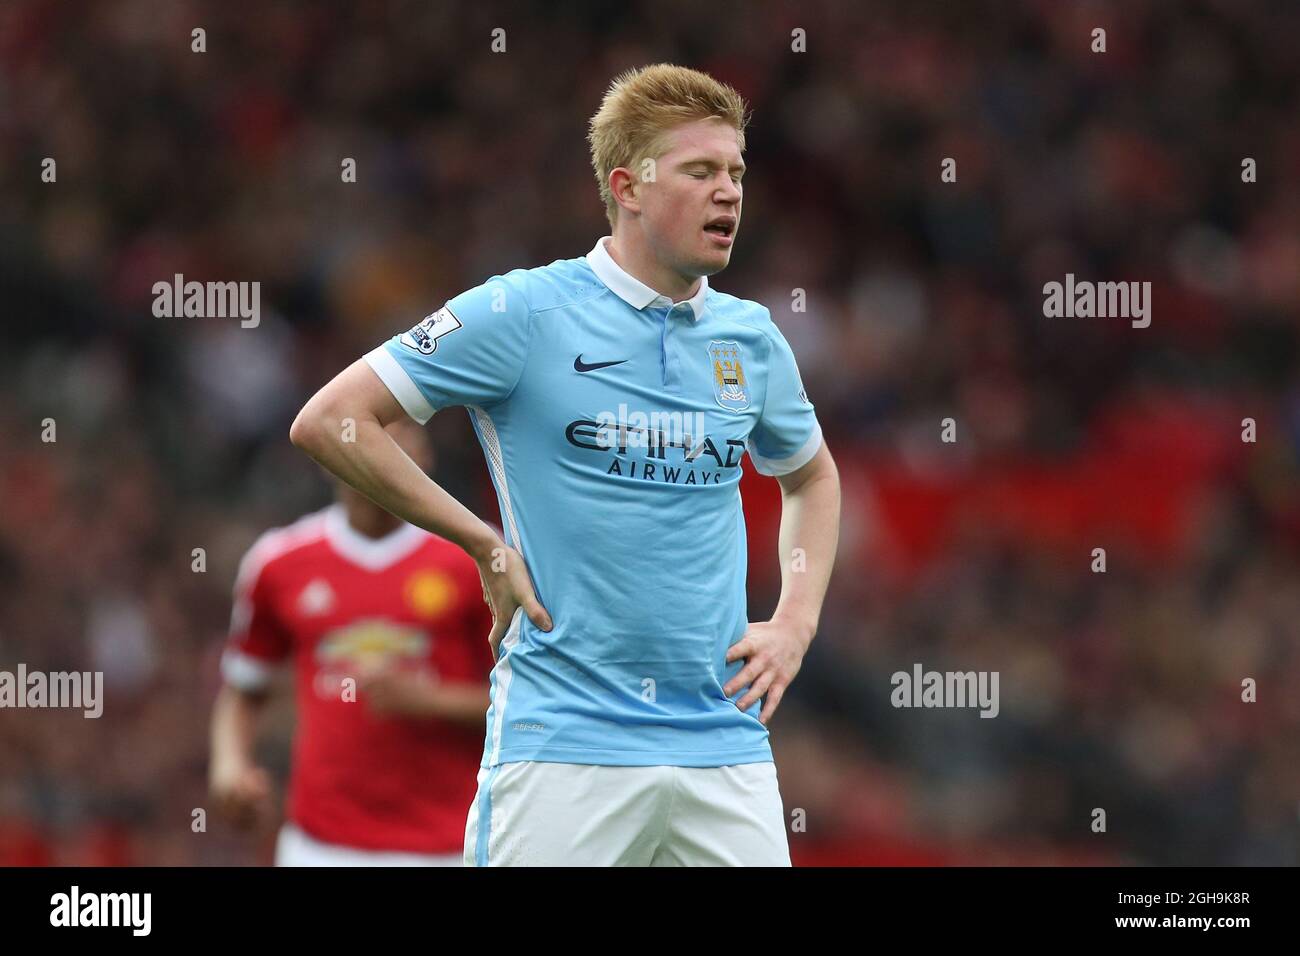 Image #: 40483738 Oct. 25, 2015 - Manchester, United Kingdom - Kevin De  Bruyne of Manchester City looks dejected - Manchester United vs Manchester  City - Barclay's Premier League - Old Trafford - Manchester - 25/10/2015  Stock Photo - Alamy